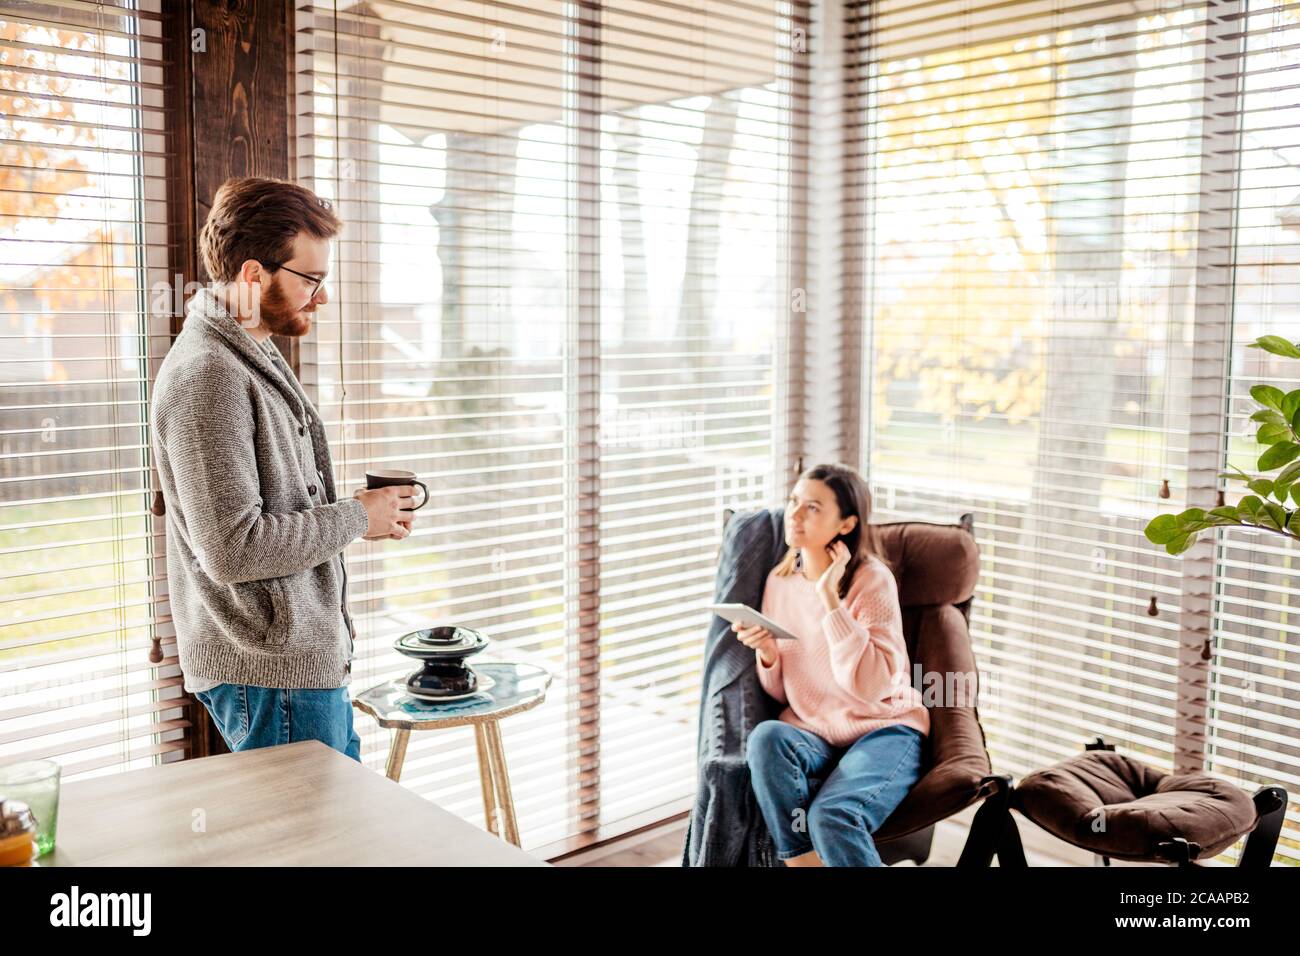 Attractive young couple discussing purchase of a new house in a well-lit modern kitchen while they are talking and drinking coffee Stock Photo